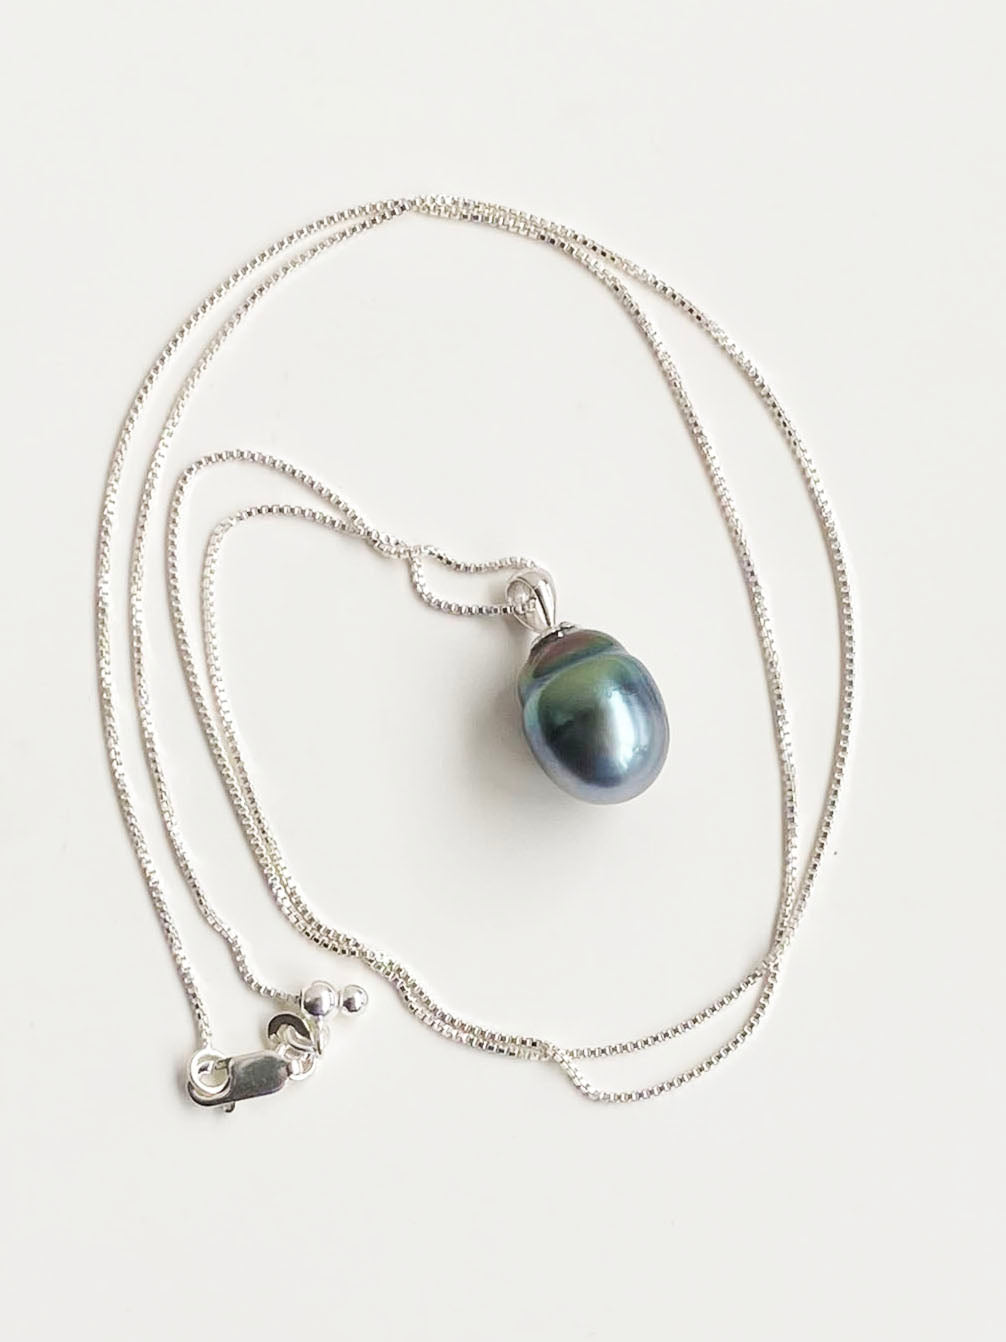 11-15mm Peacock Tahitian Pearl Pendant on 14k White Gold with Sterling Chain by Linda Queally